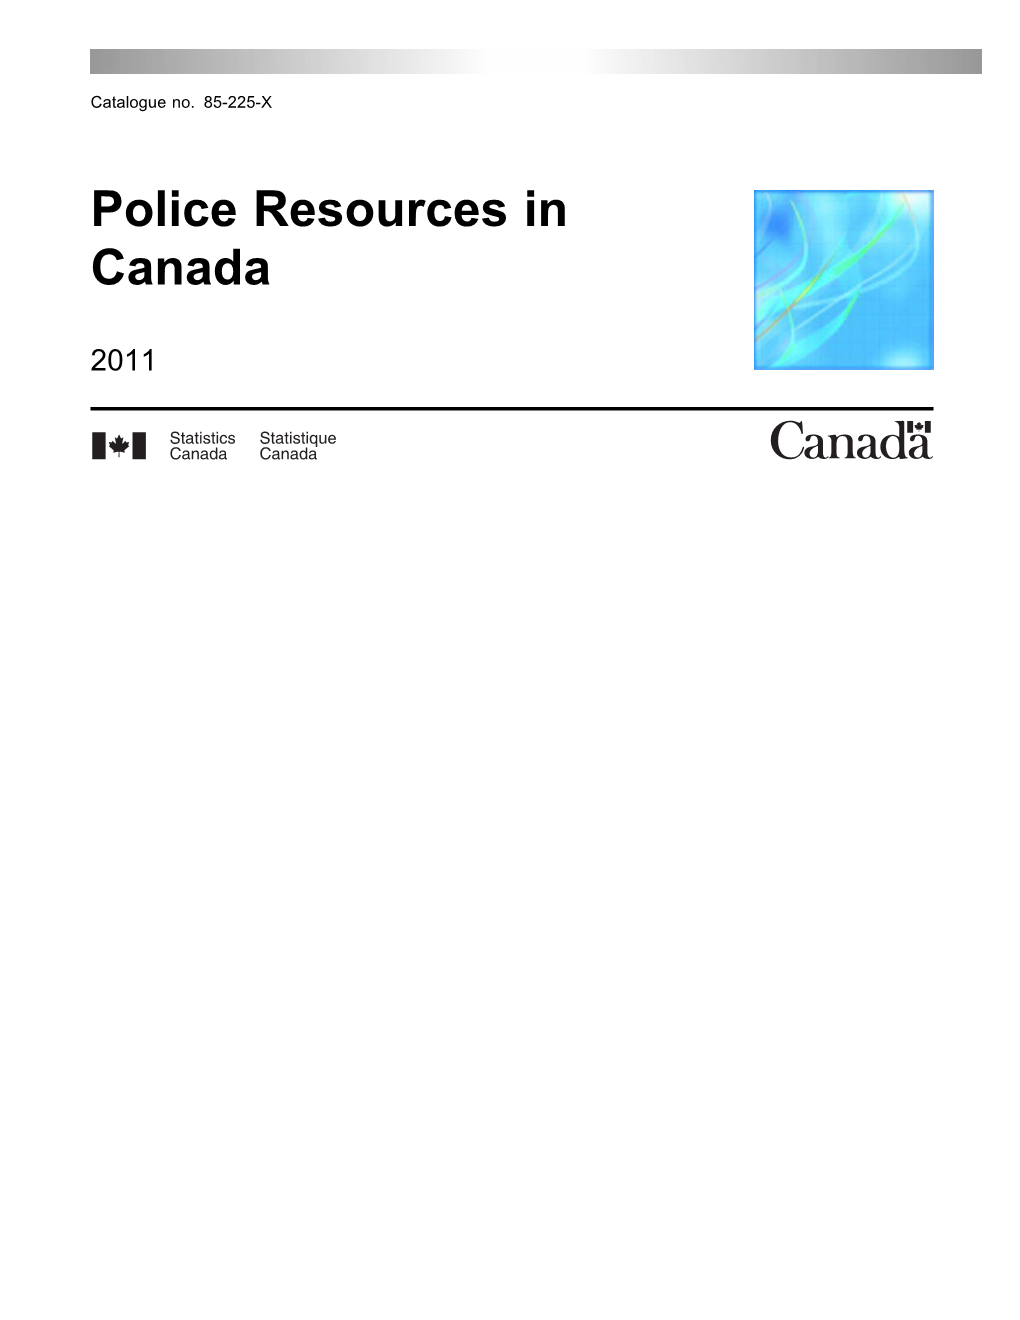 Police Resources in Canada